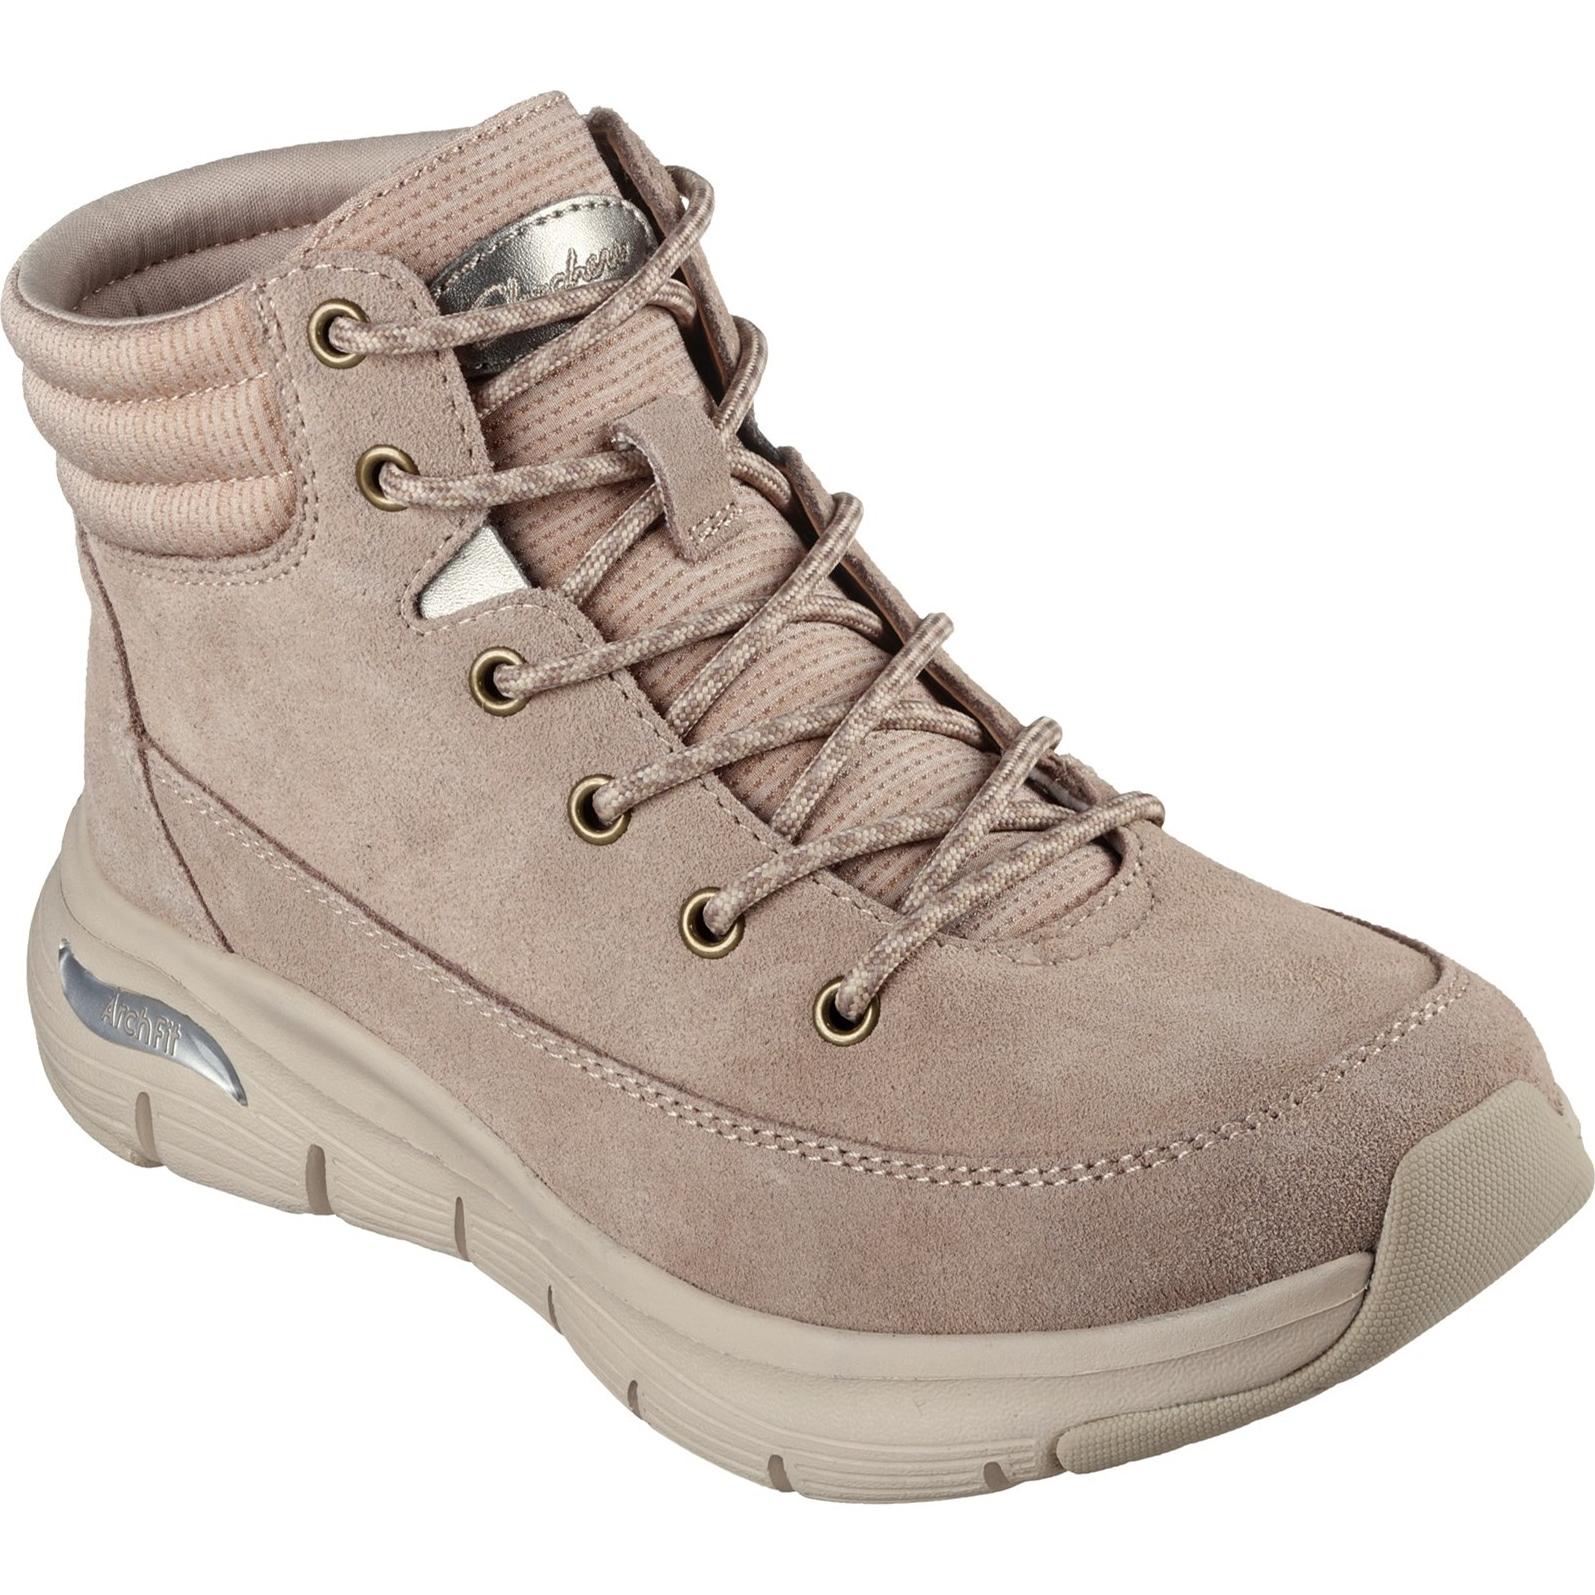 Skechers Arch Fit Smooth Comfy Chill Boots